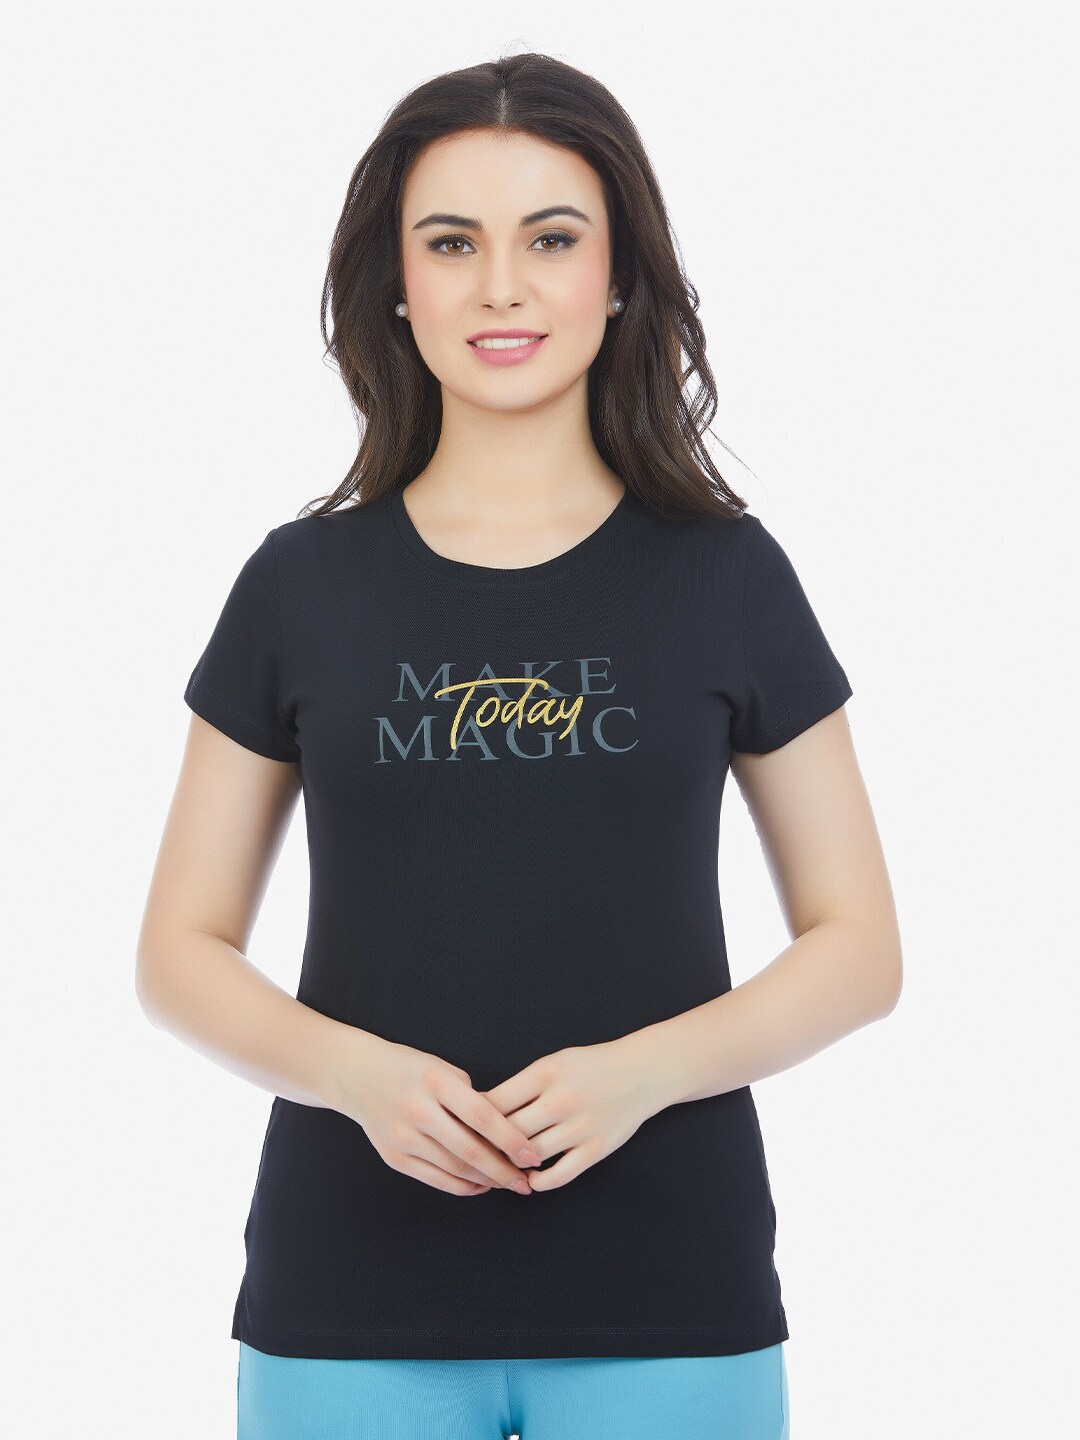 MAYSIXTY Women Typography Printed Cotton T-shirt Price in India